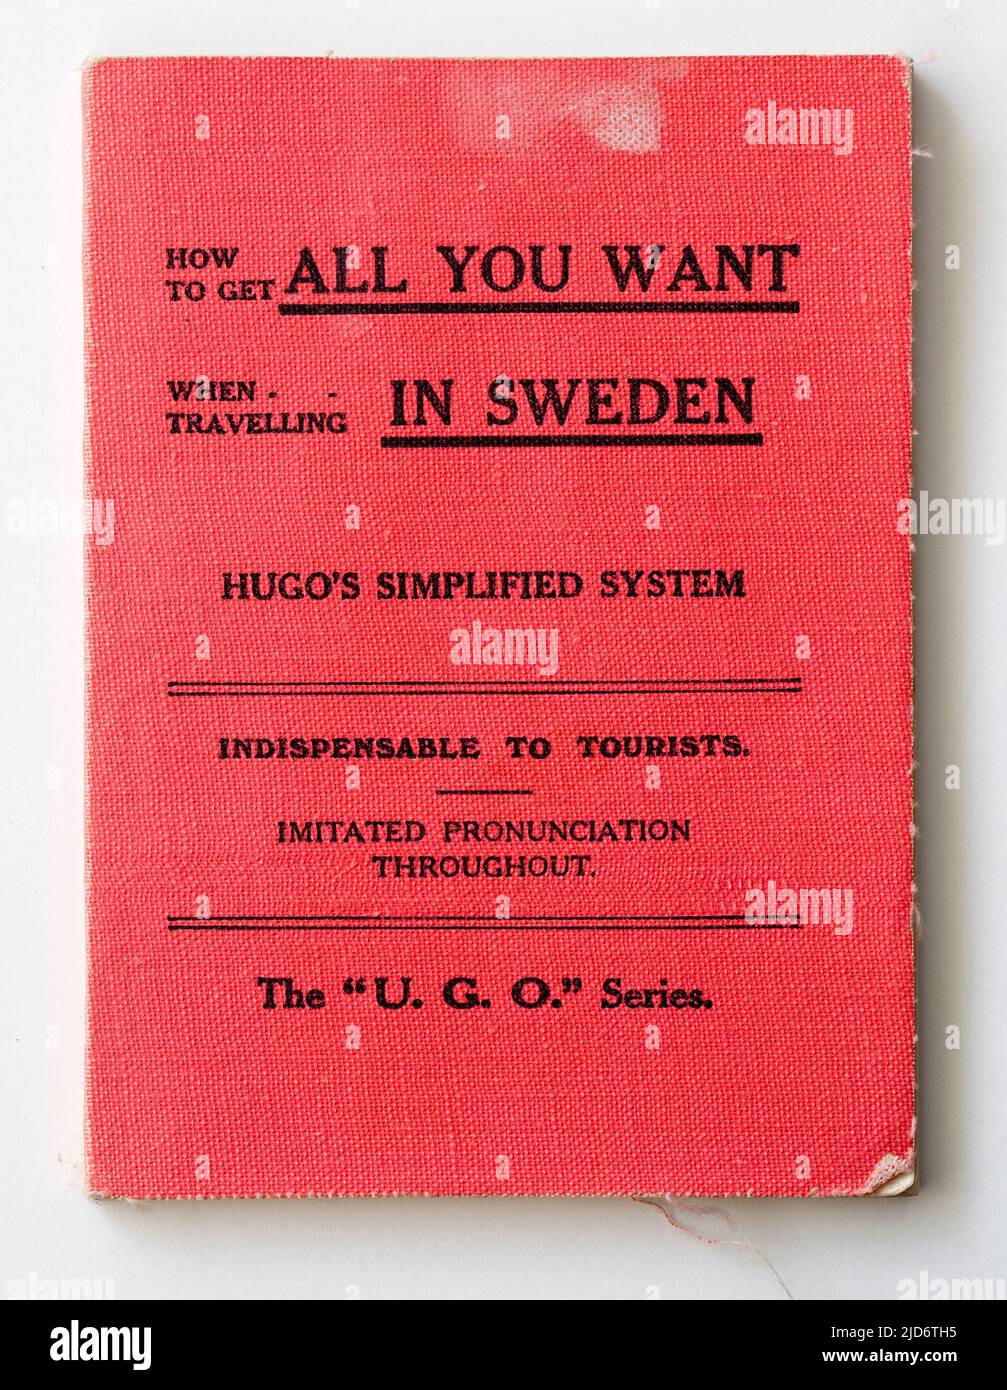 Vintage Edition of 'All You Want in Sweden' Language Travel Guide Stock Photo